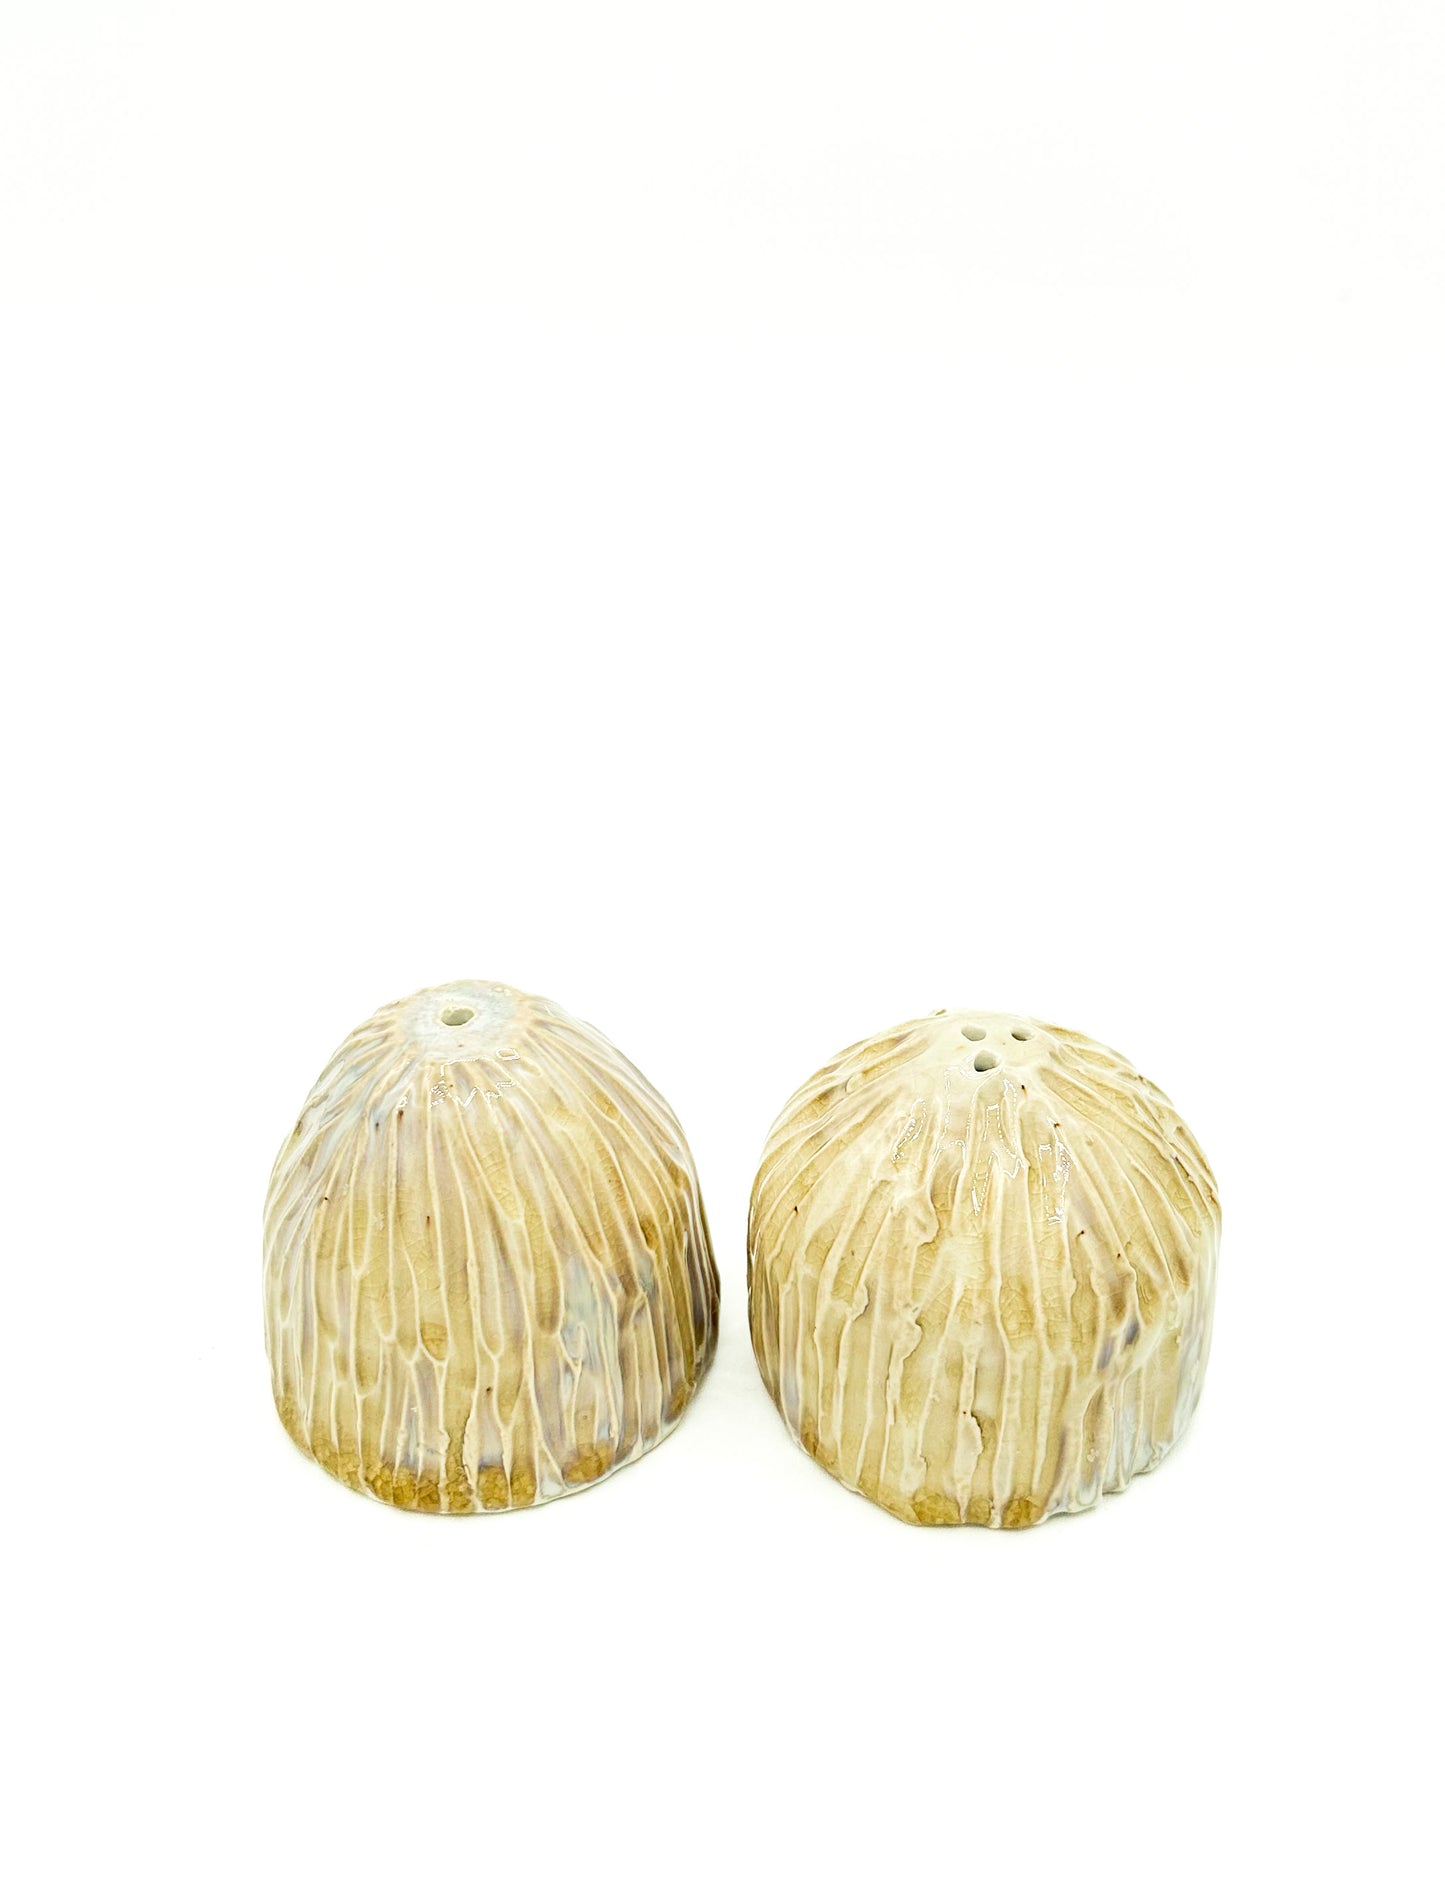 A Drink Well Collection : Iridescent Carved Salt and Pepper Shaker Set